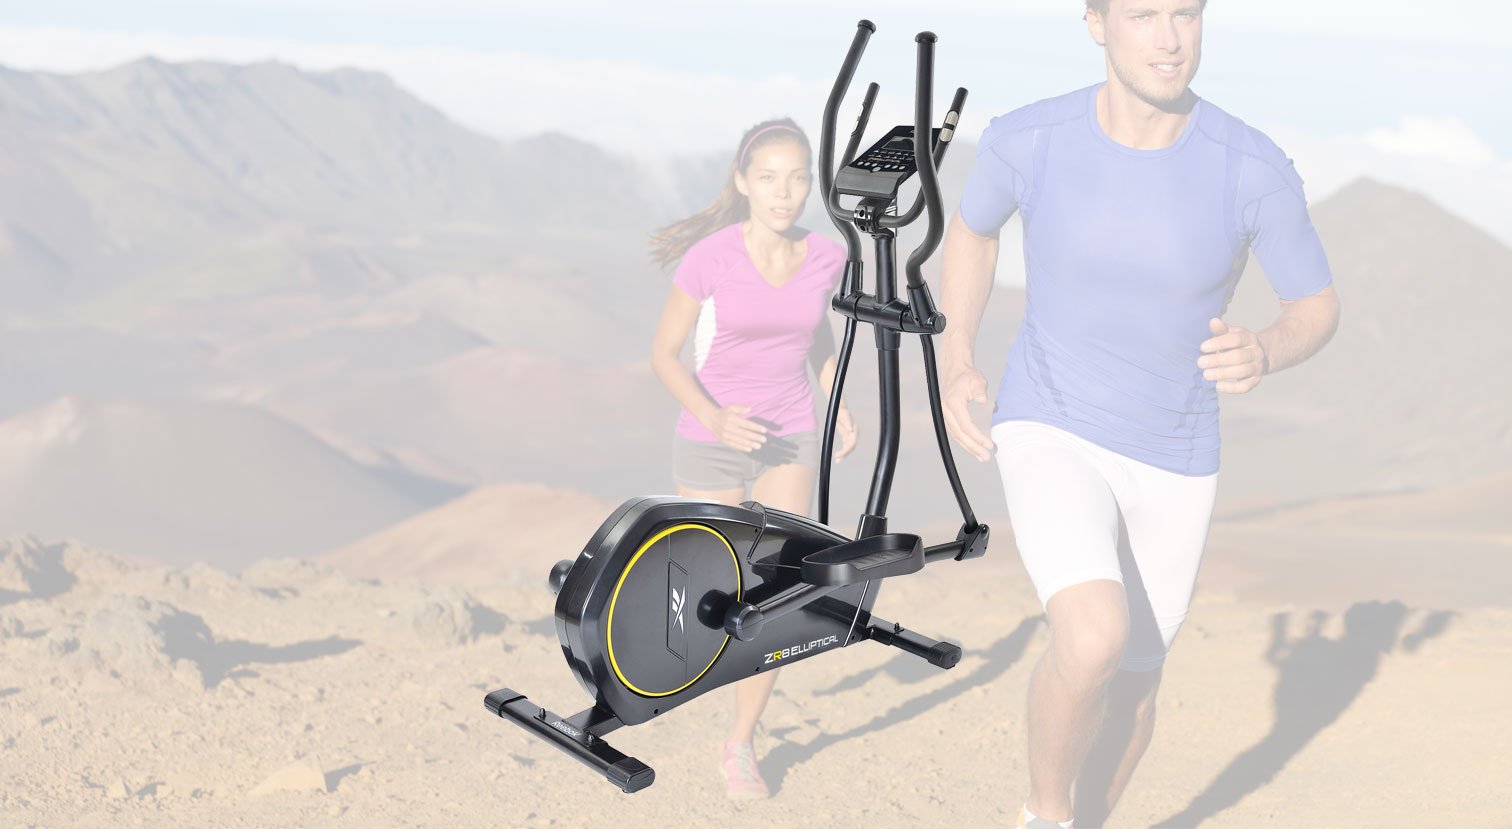 ZR8 Cross Trainer Review - Does ZR8 Perform Where it Matters? - Gym Tech Review - Reviews of the Latest Equipment